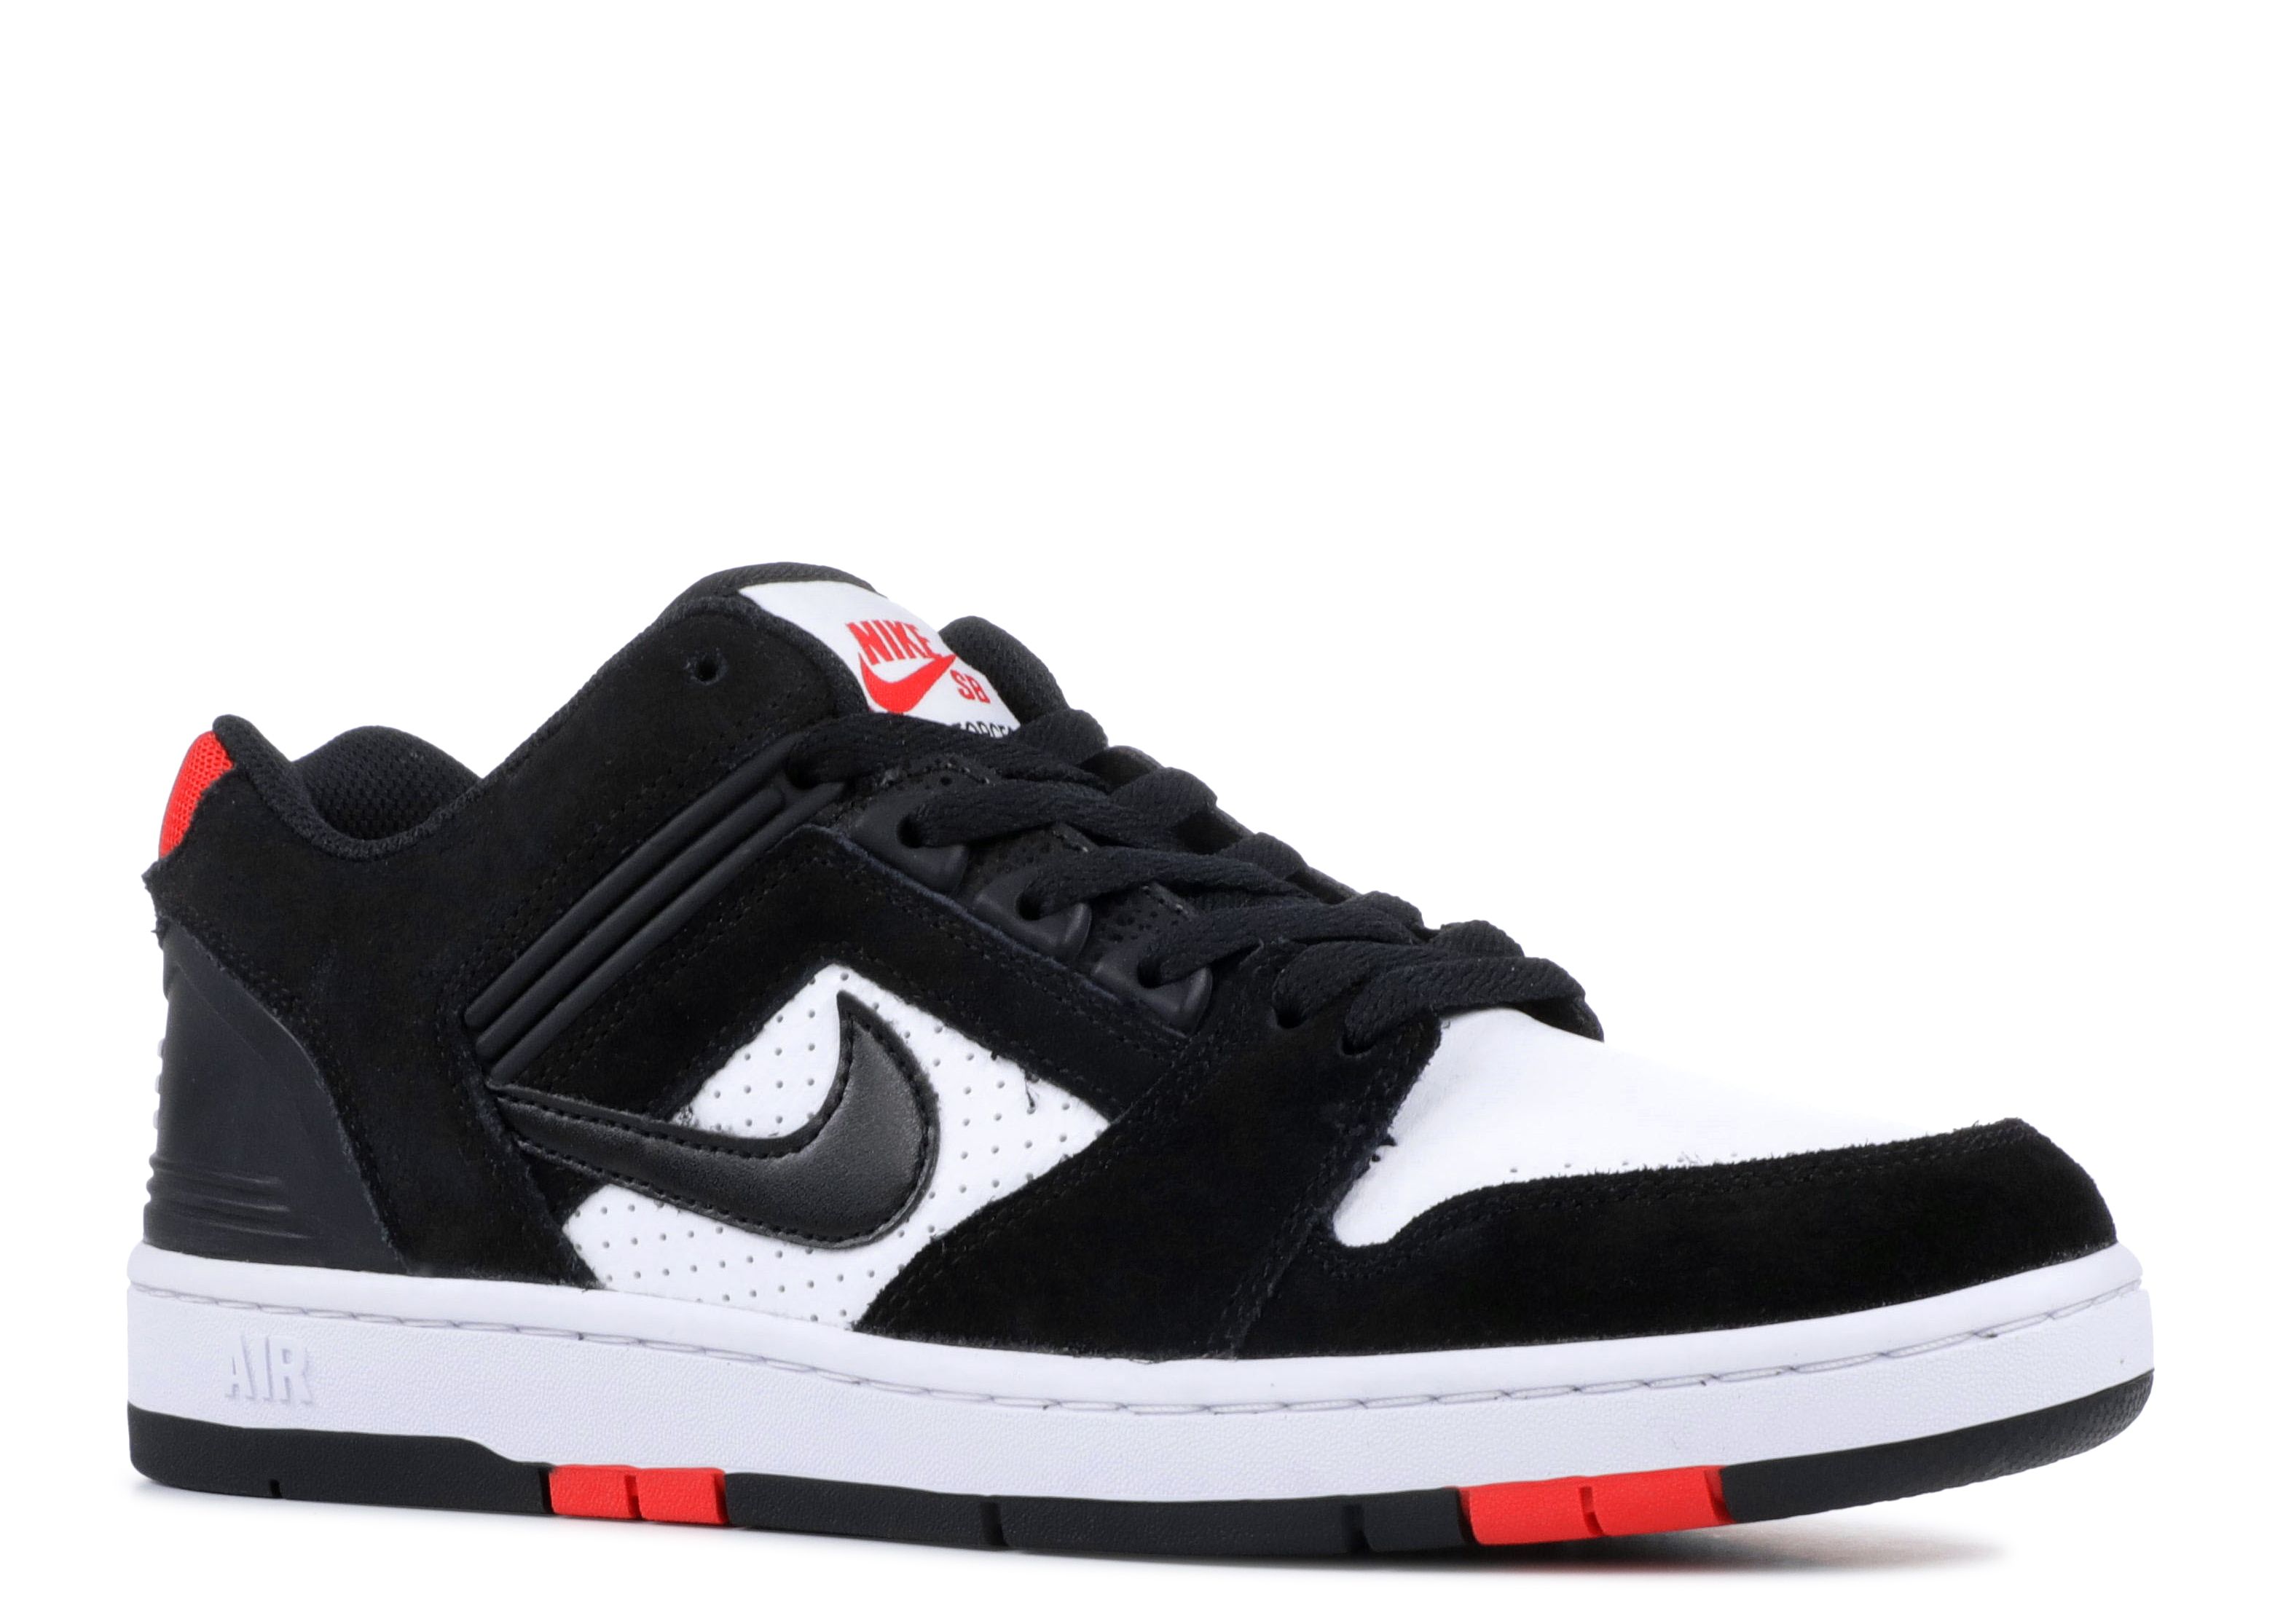 Nike SB Air Force 2 Low Rugby Men's - AO0300-364 - US